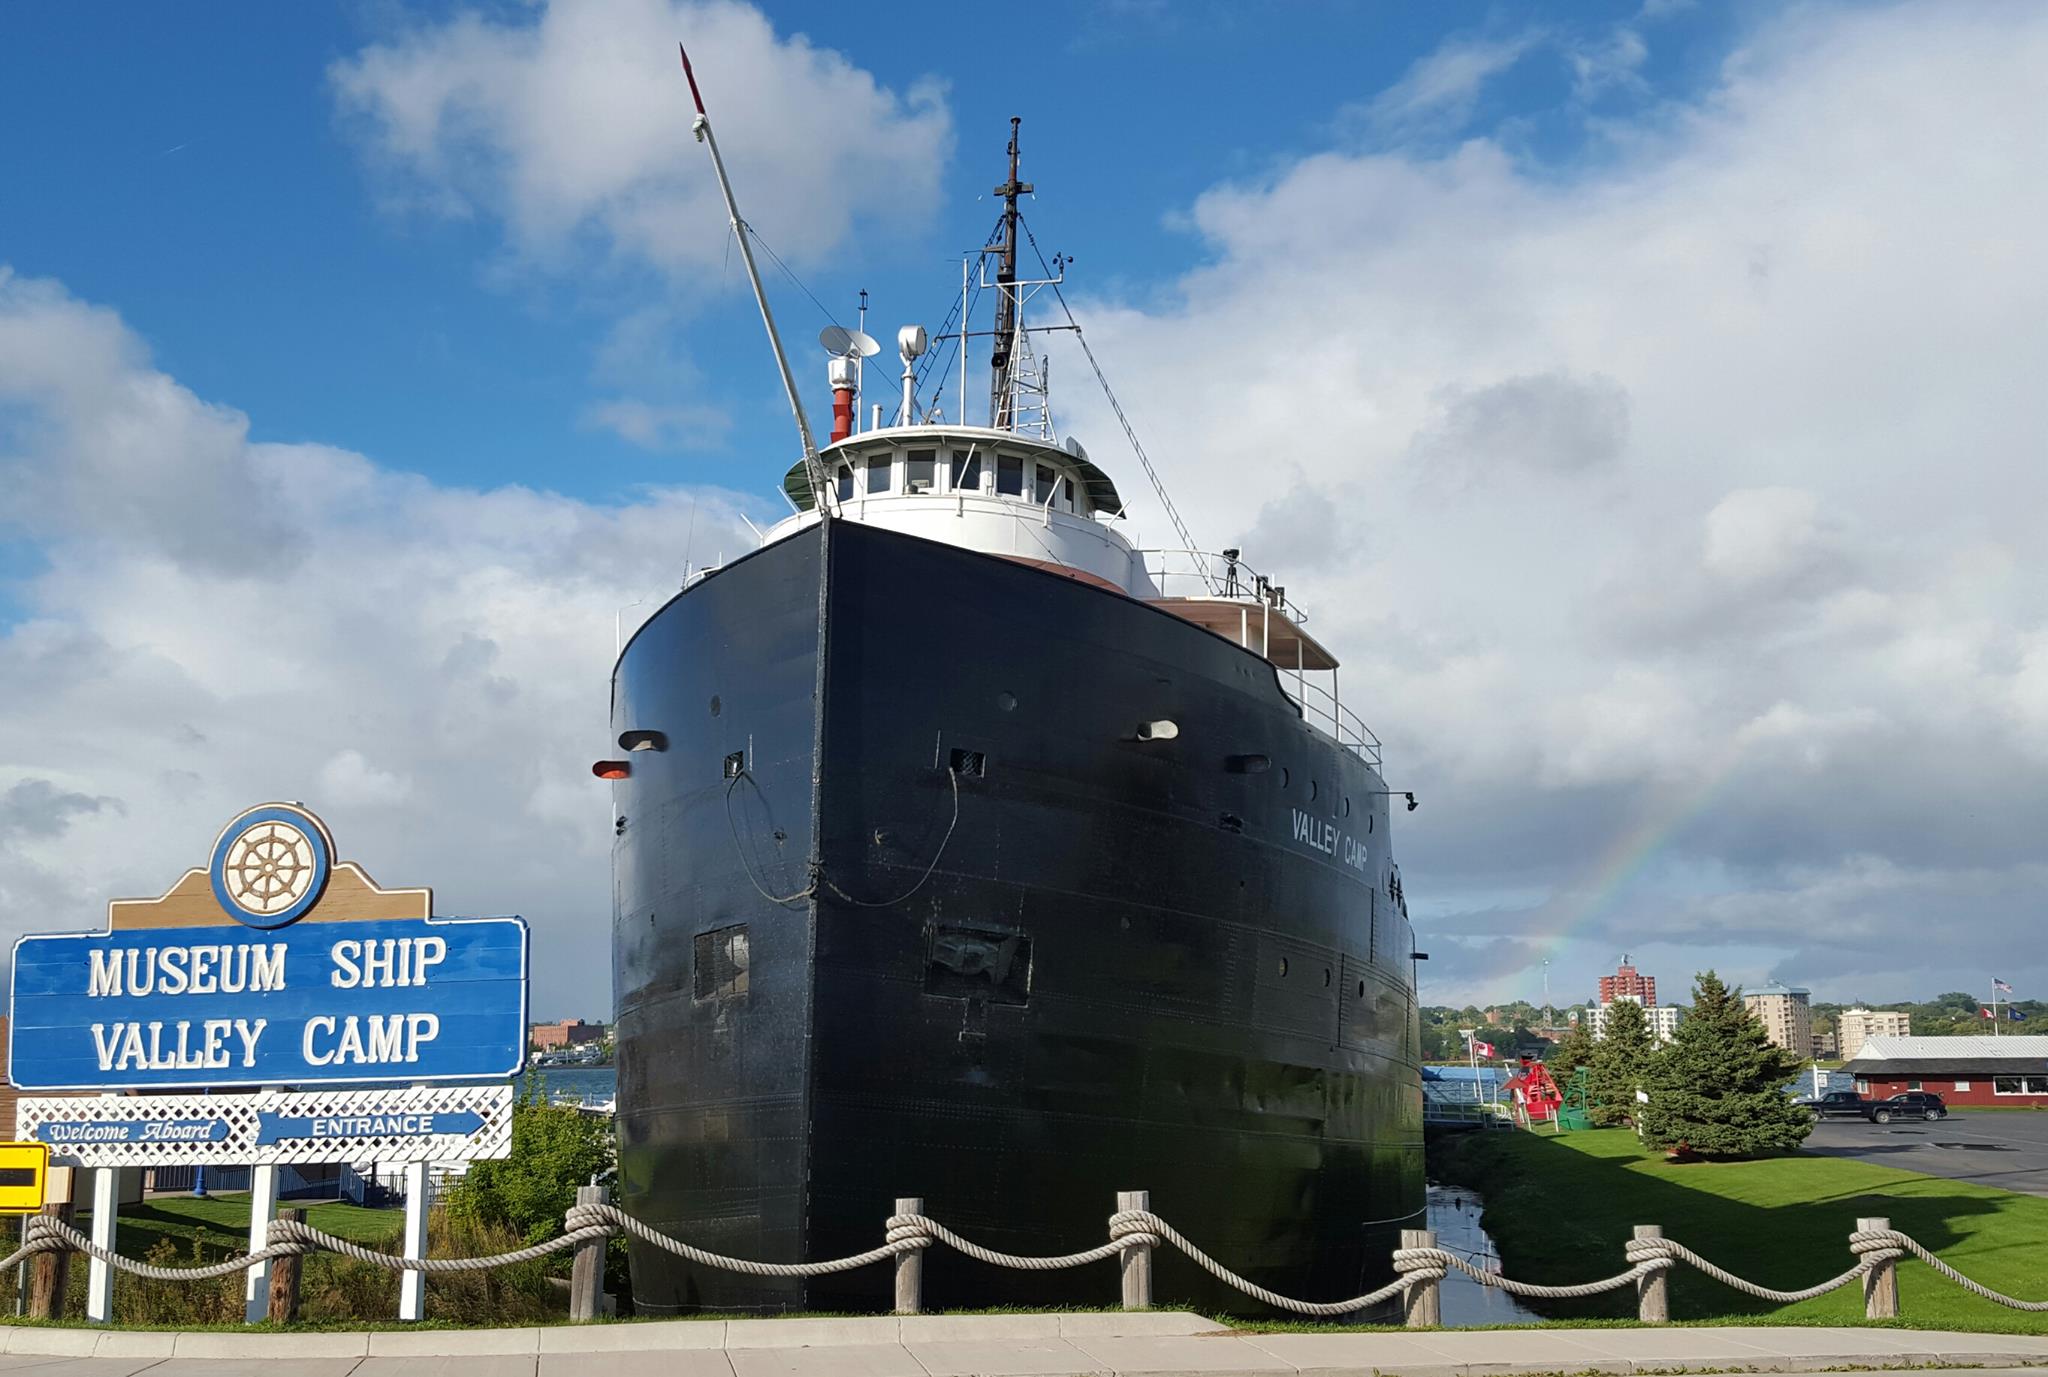 Museum Ship Valley Camp - Sault Ste Marie CVB